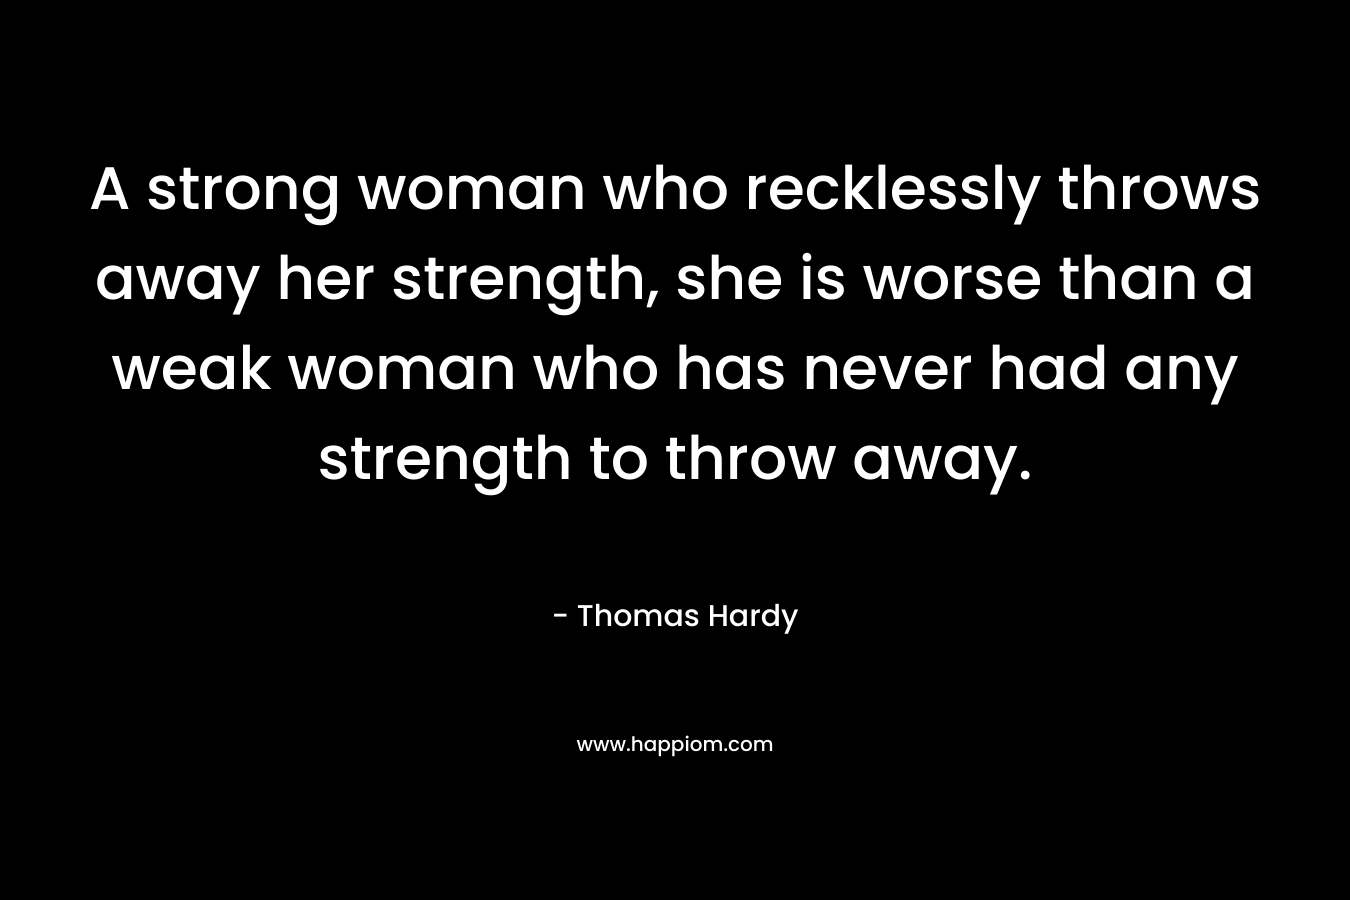 A strong woman who recklessly throws away her strength, she is worse than a weak woman who has never had any strength to throw away.